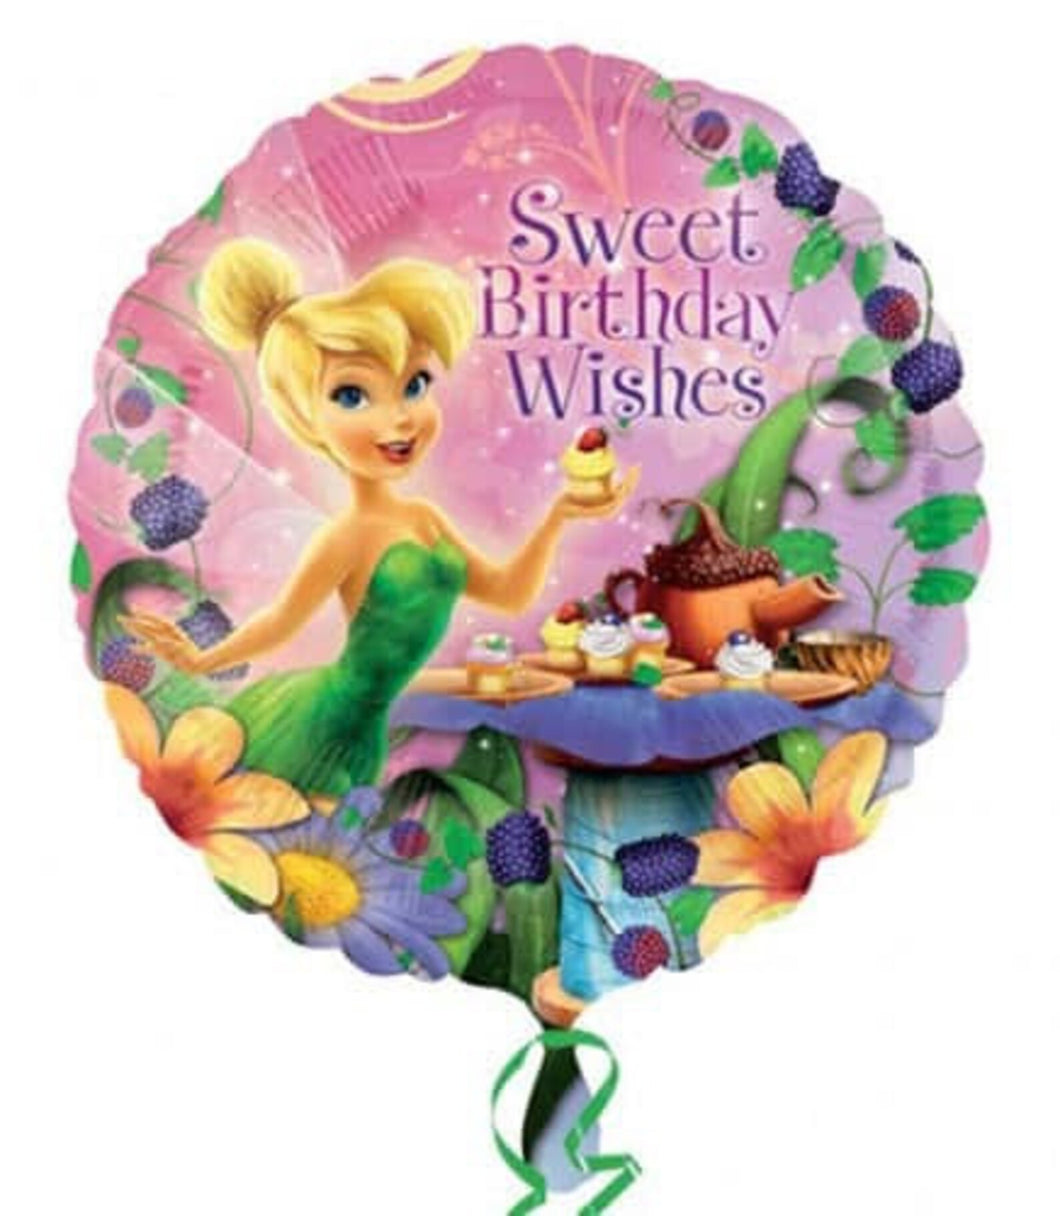 Tinkerbell Sweet Birthday Wishes Foil Balloon